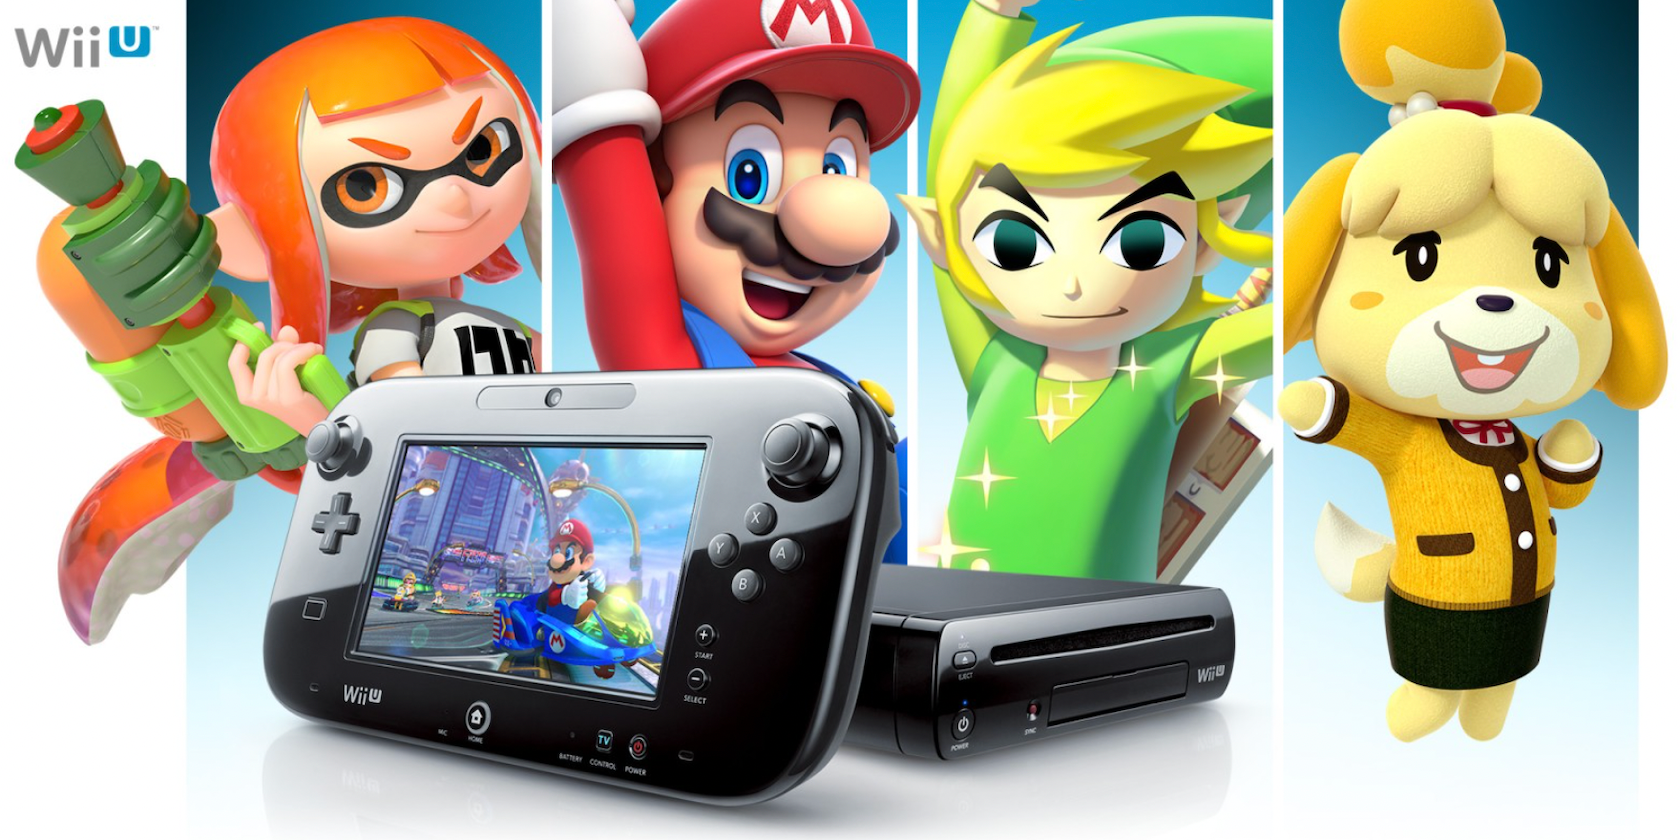 Wii U Game That Was Once Forgotten Will Come to Nintendo Switch in